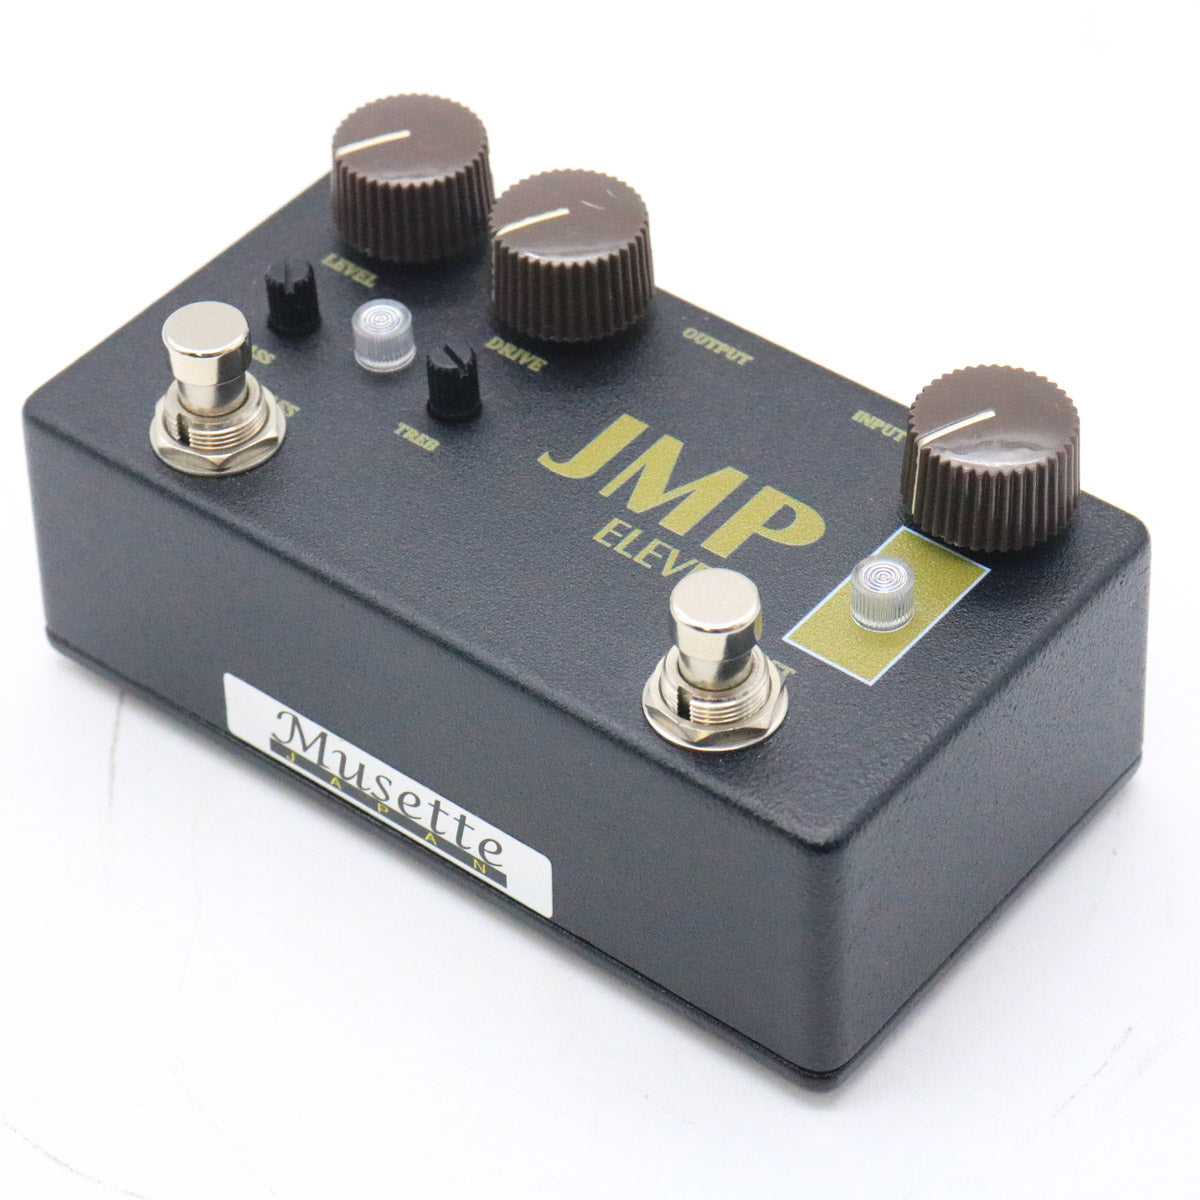 Lovepedal JMP Eleven